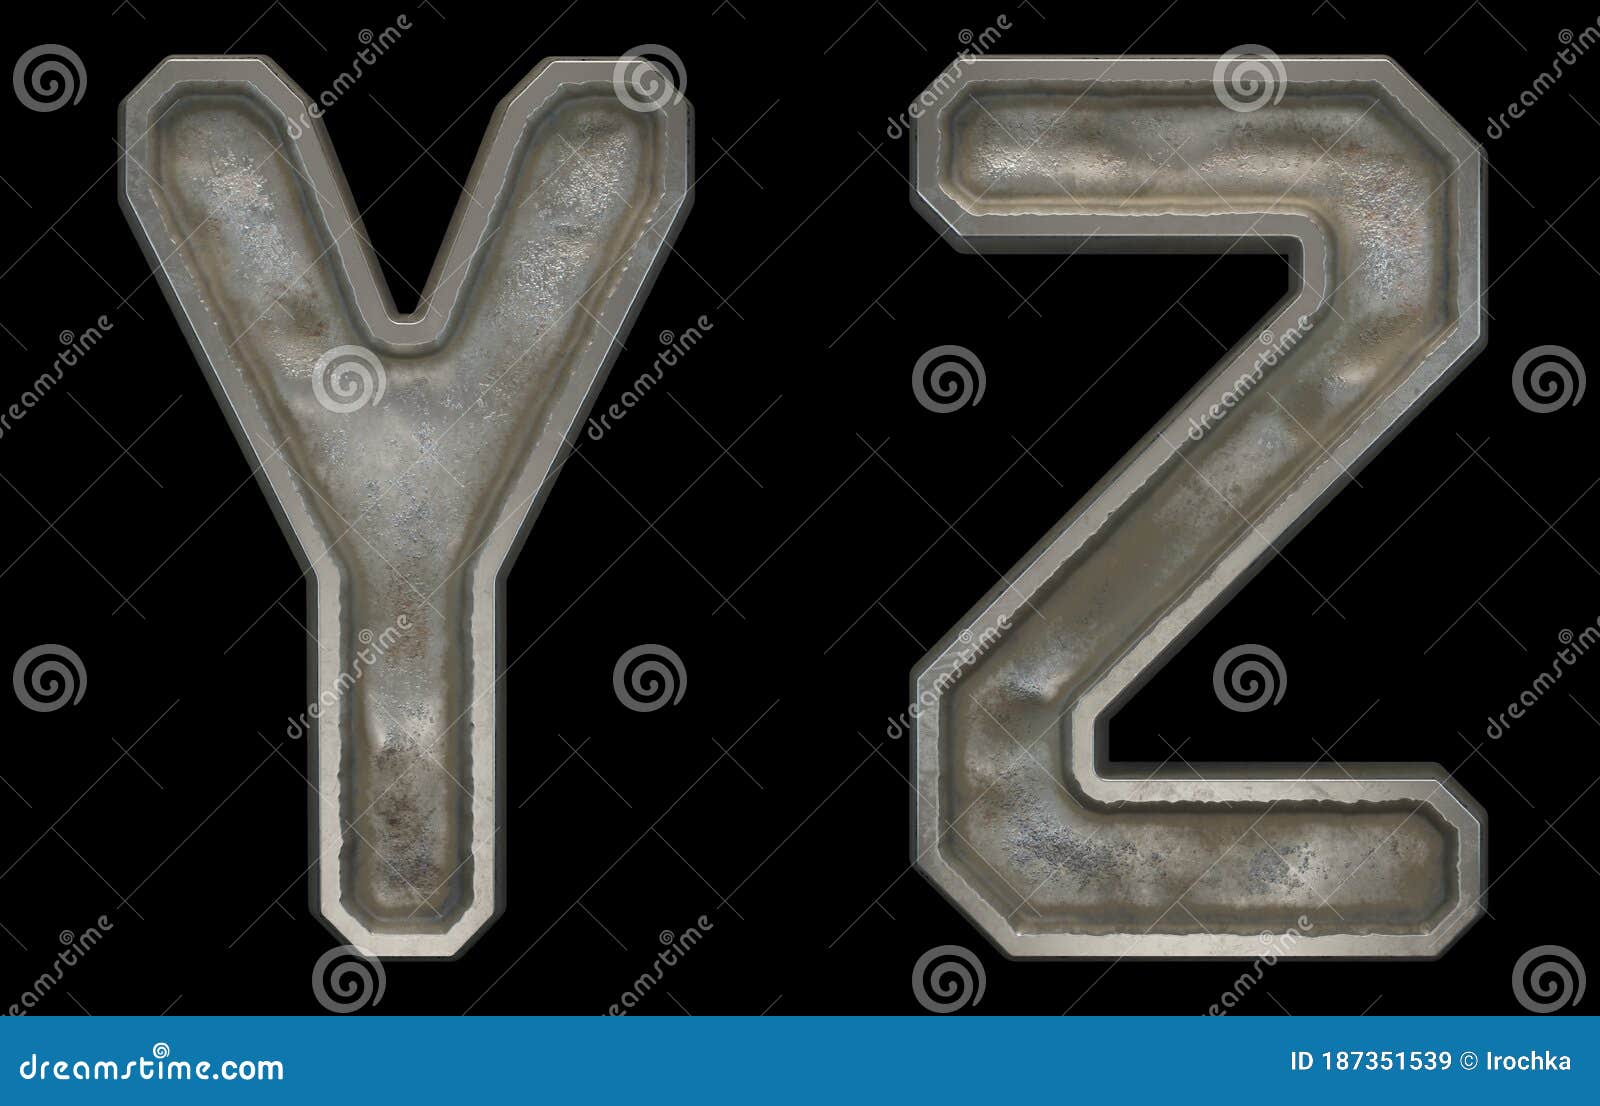 Set of Capital Letters Y and Z Made of Industrial Metal on Black ...